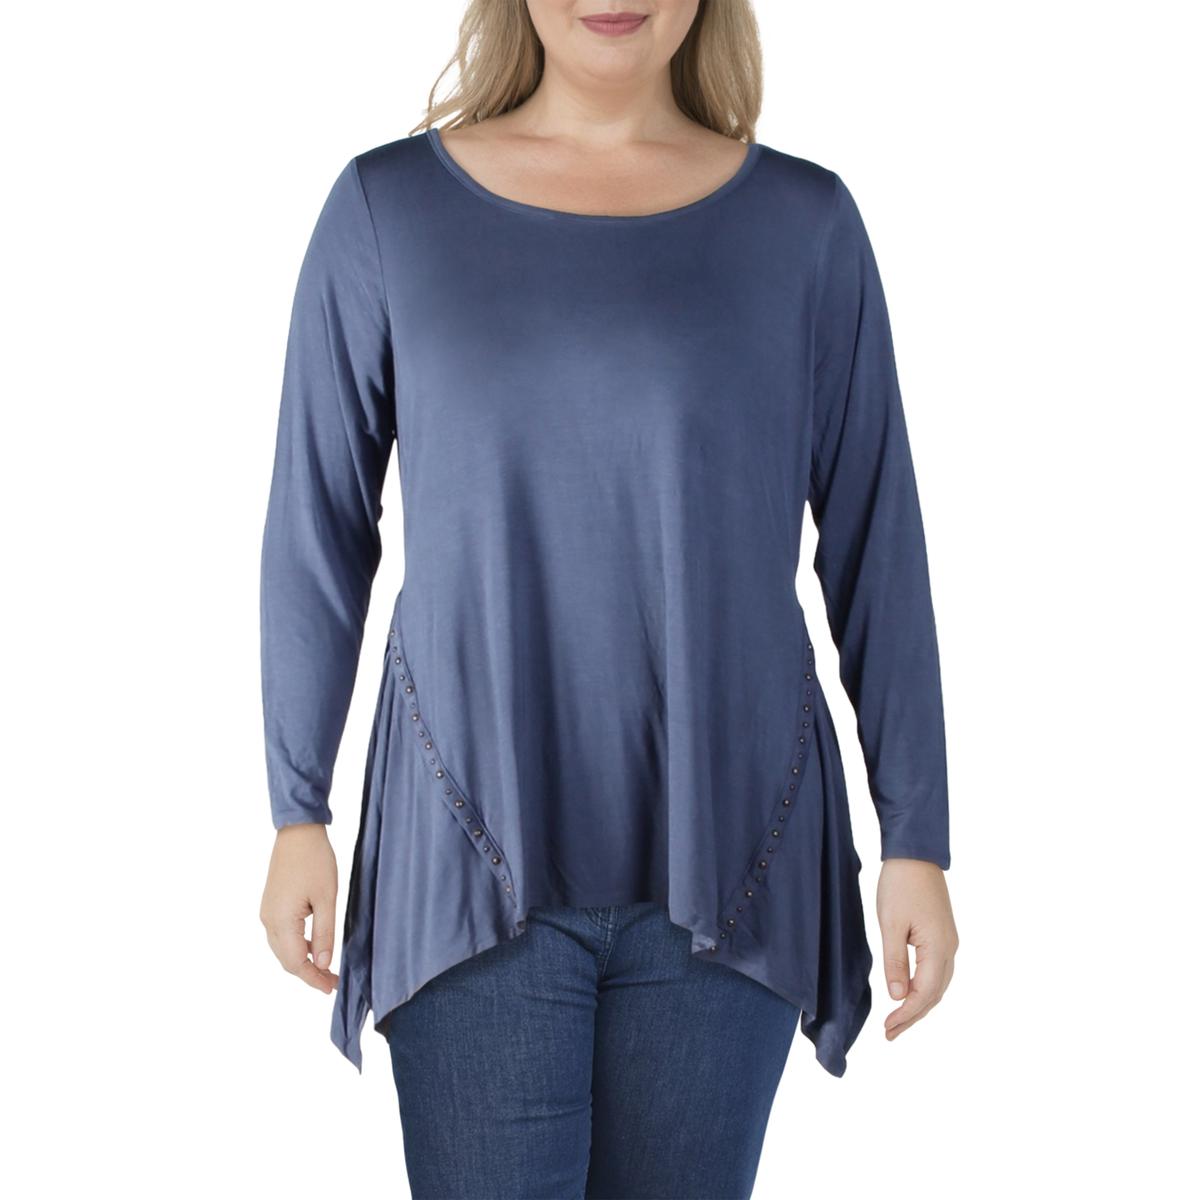 Belle by Belldini Womens Blue Embellished Pullover Top Shirt Plus 1X ...